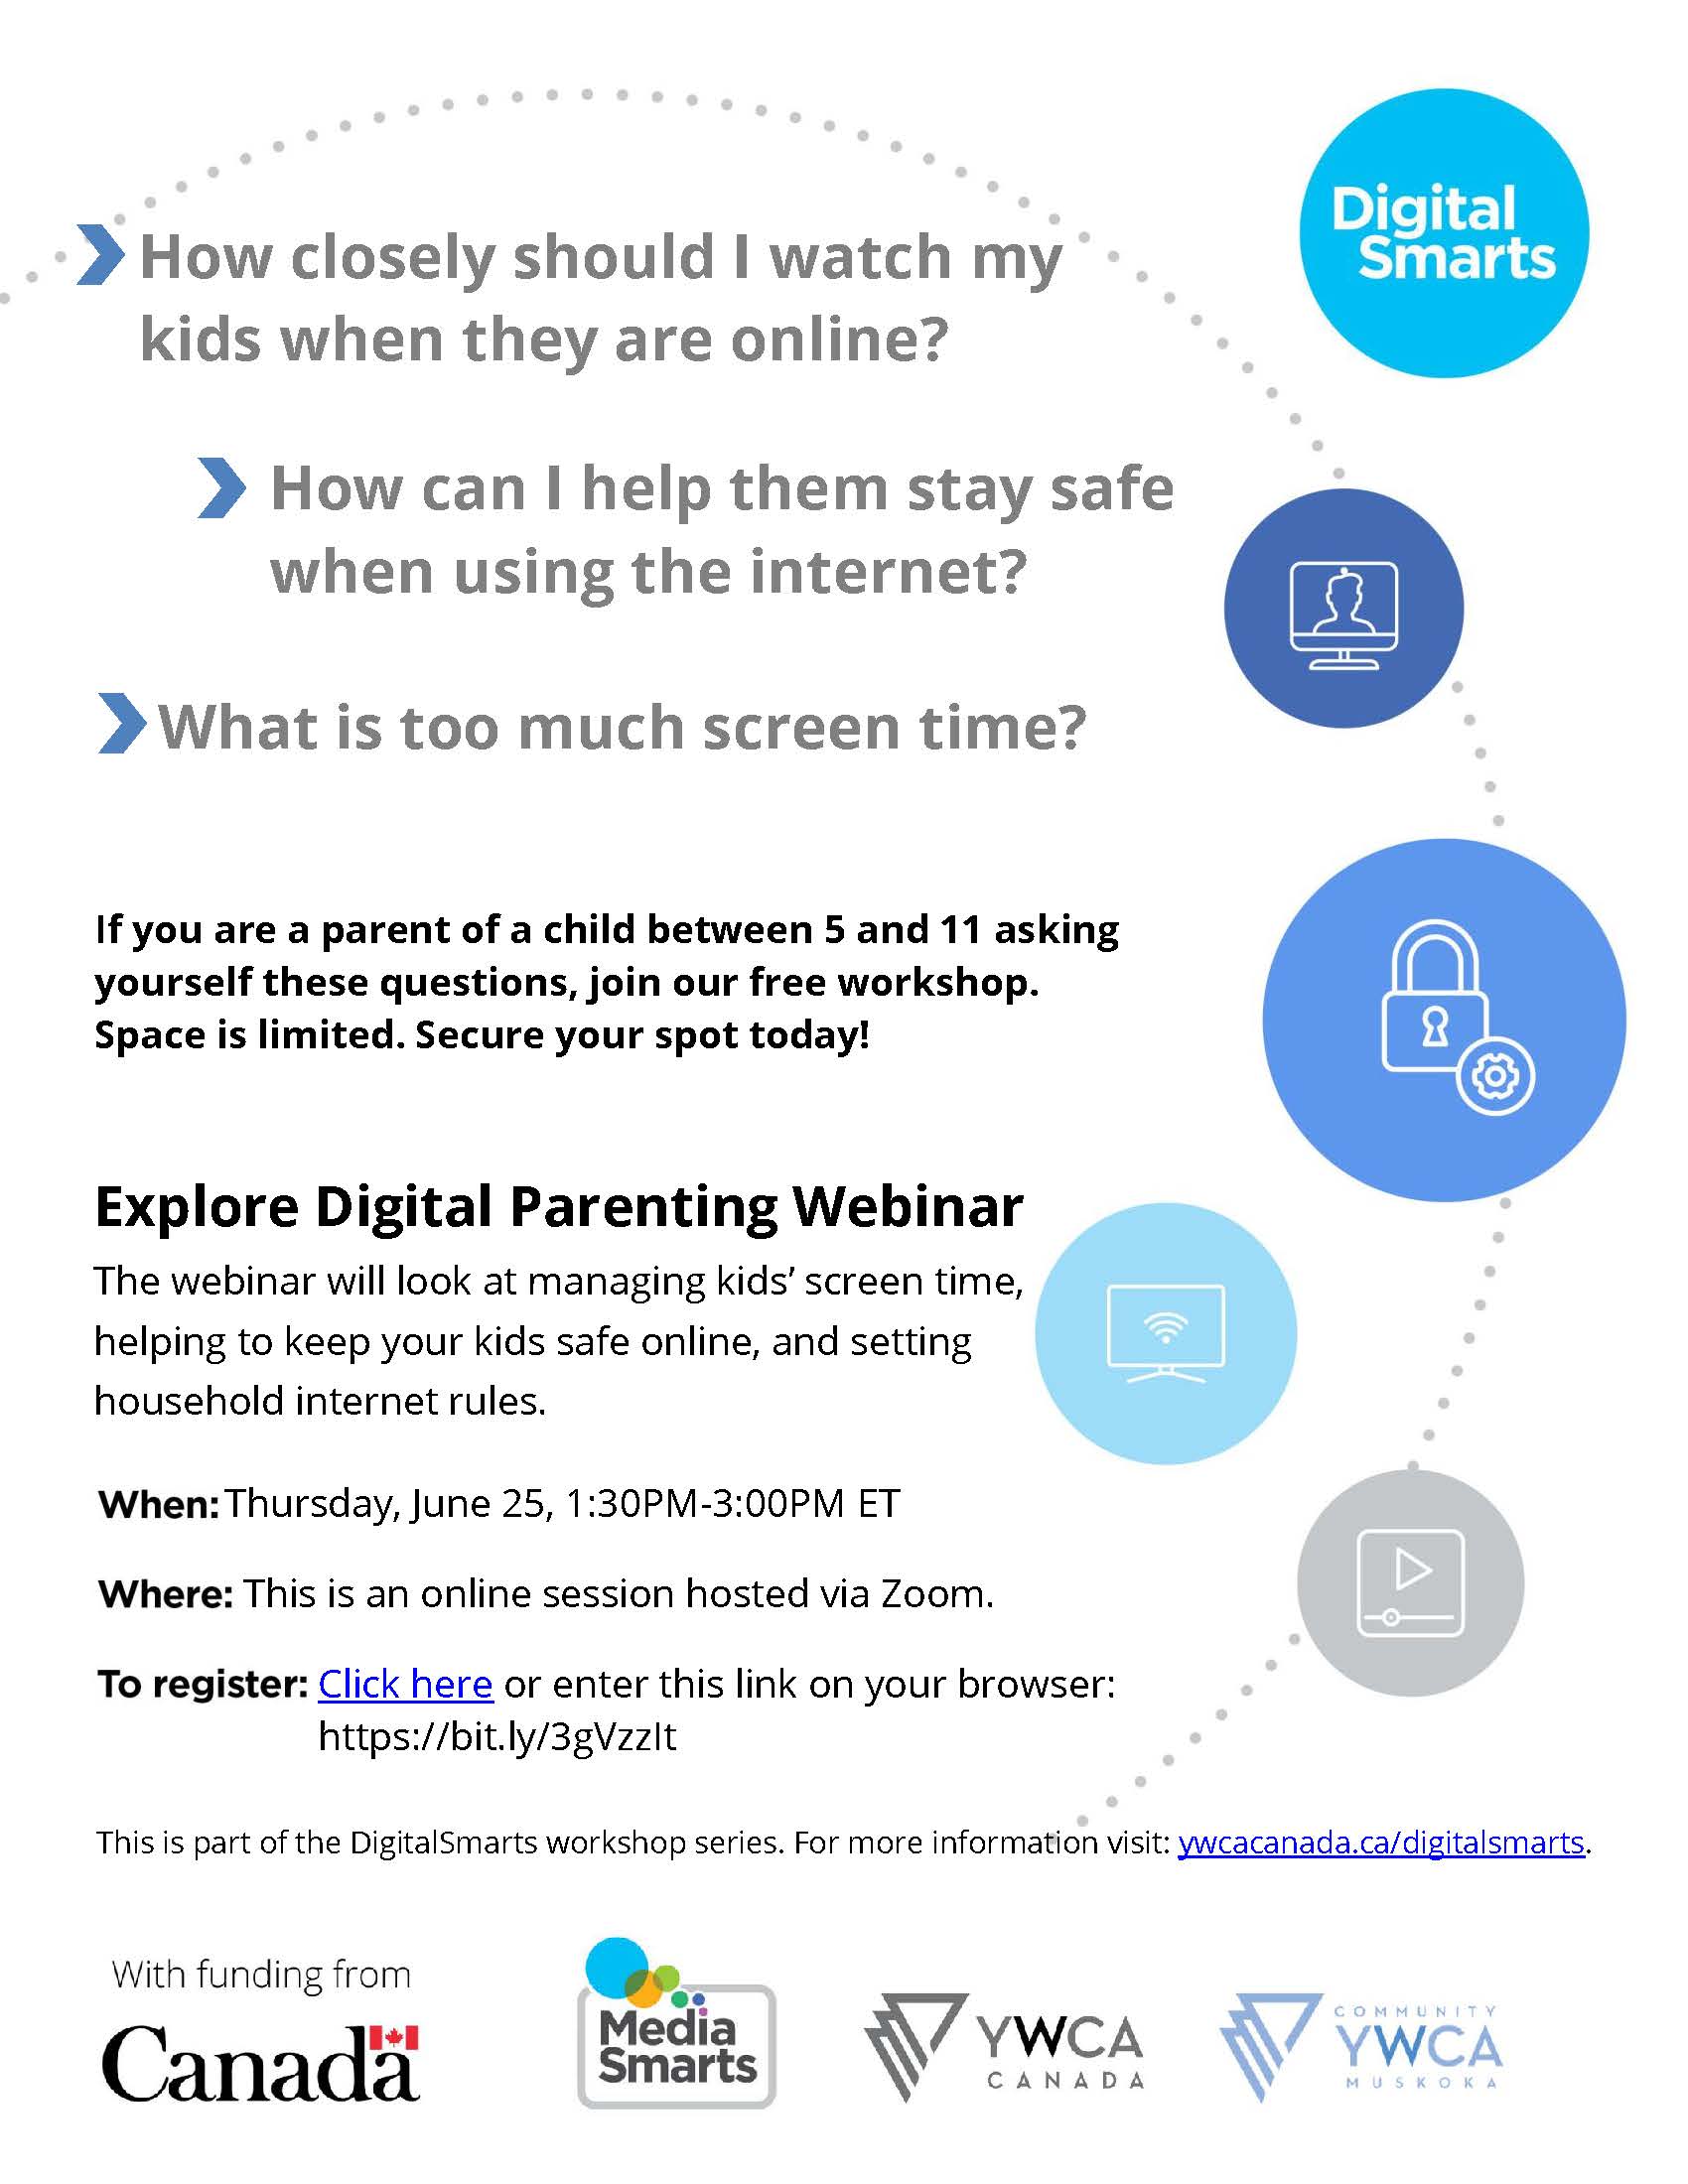 Learn the fundamentals of Digital Parenting - BC Parent Newsmagazine